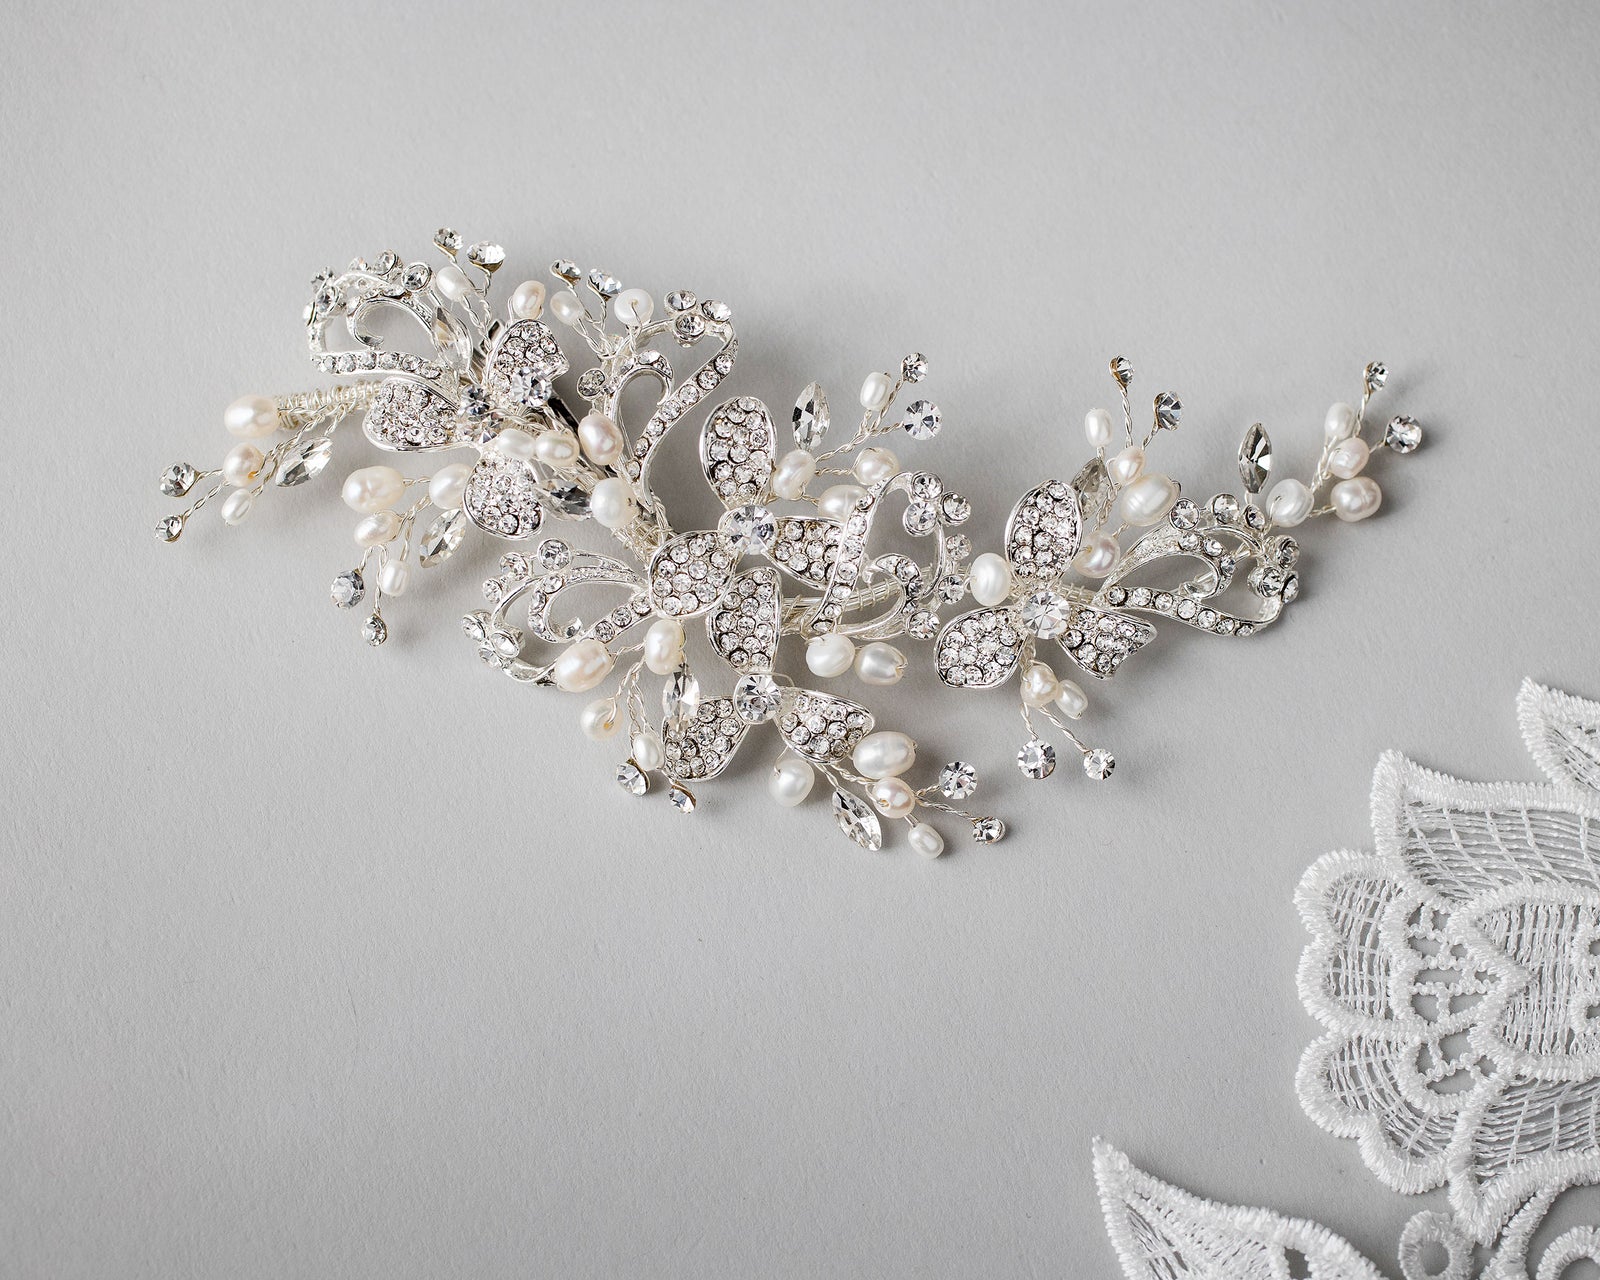 Crystal wedding hair clip with pearls